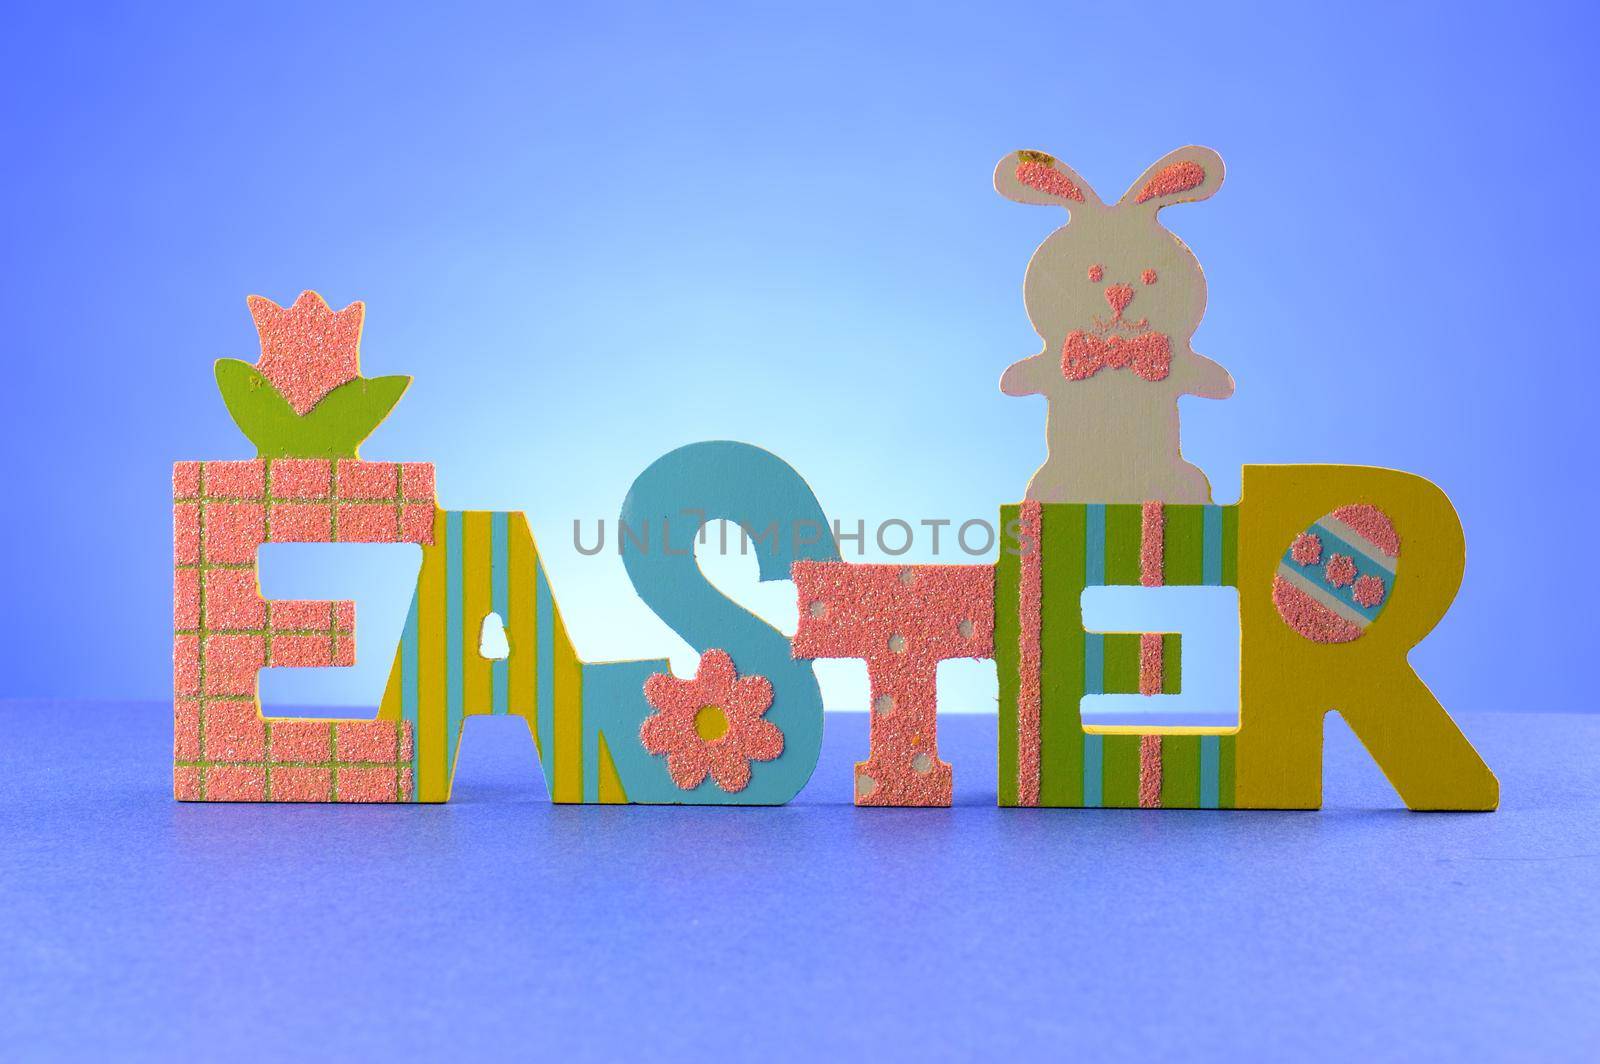 A festive Easter sign for the holiday season over a blue background.